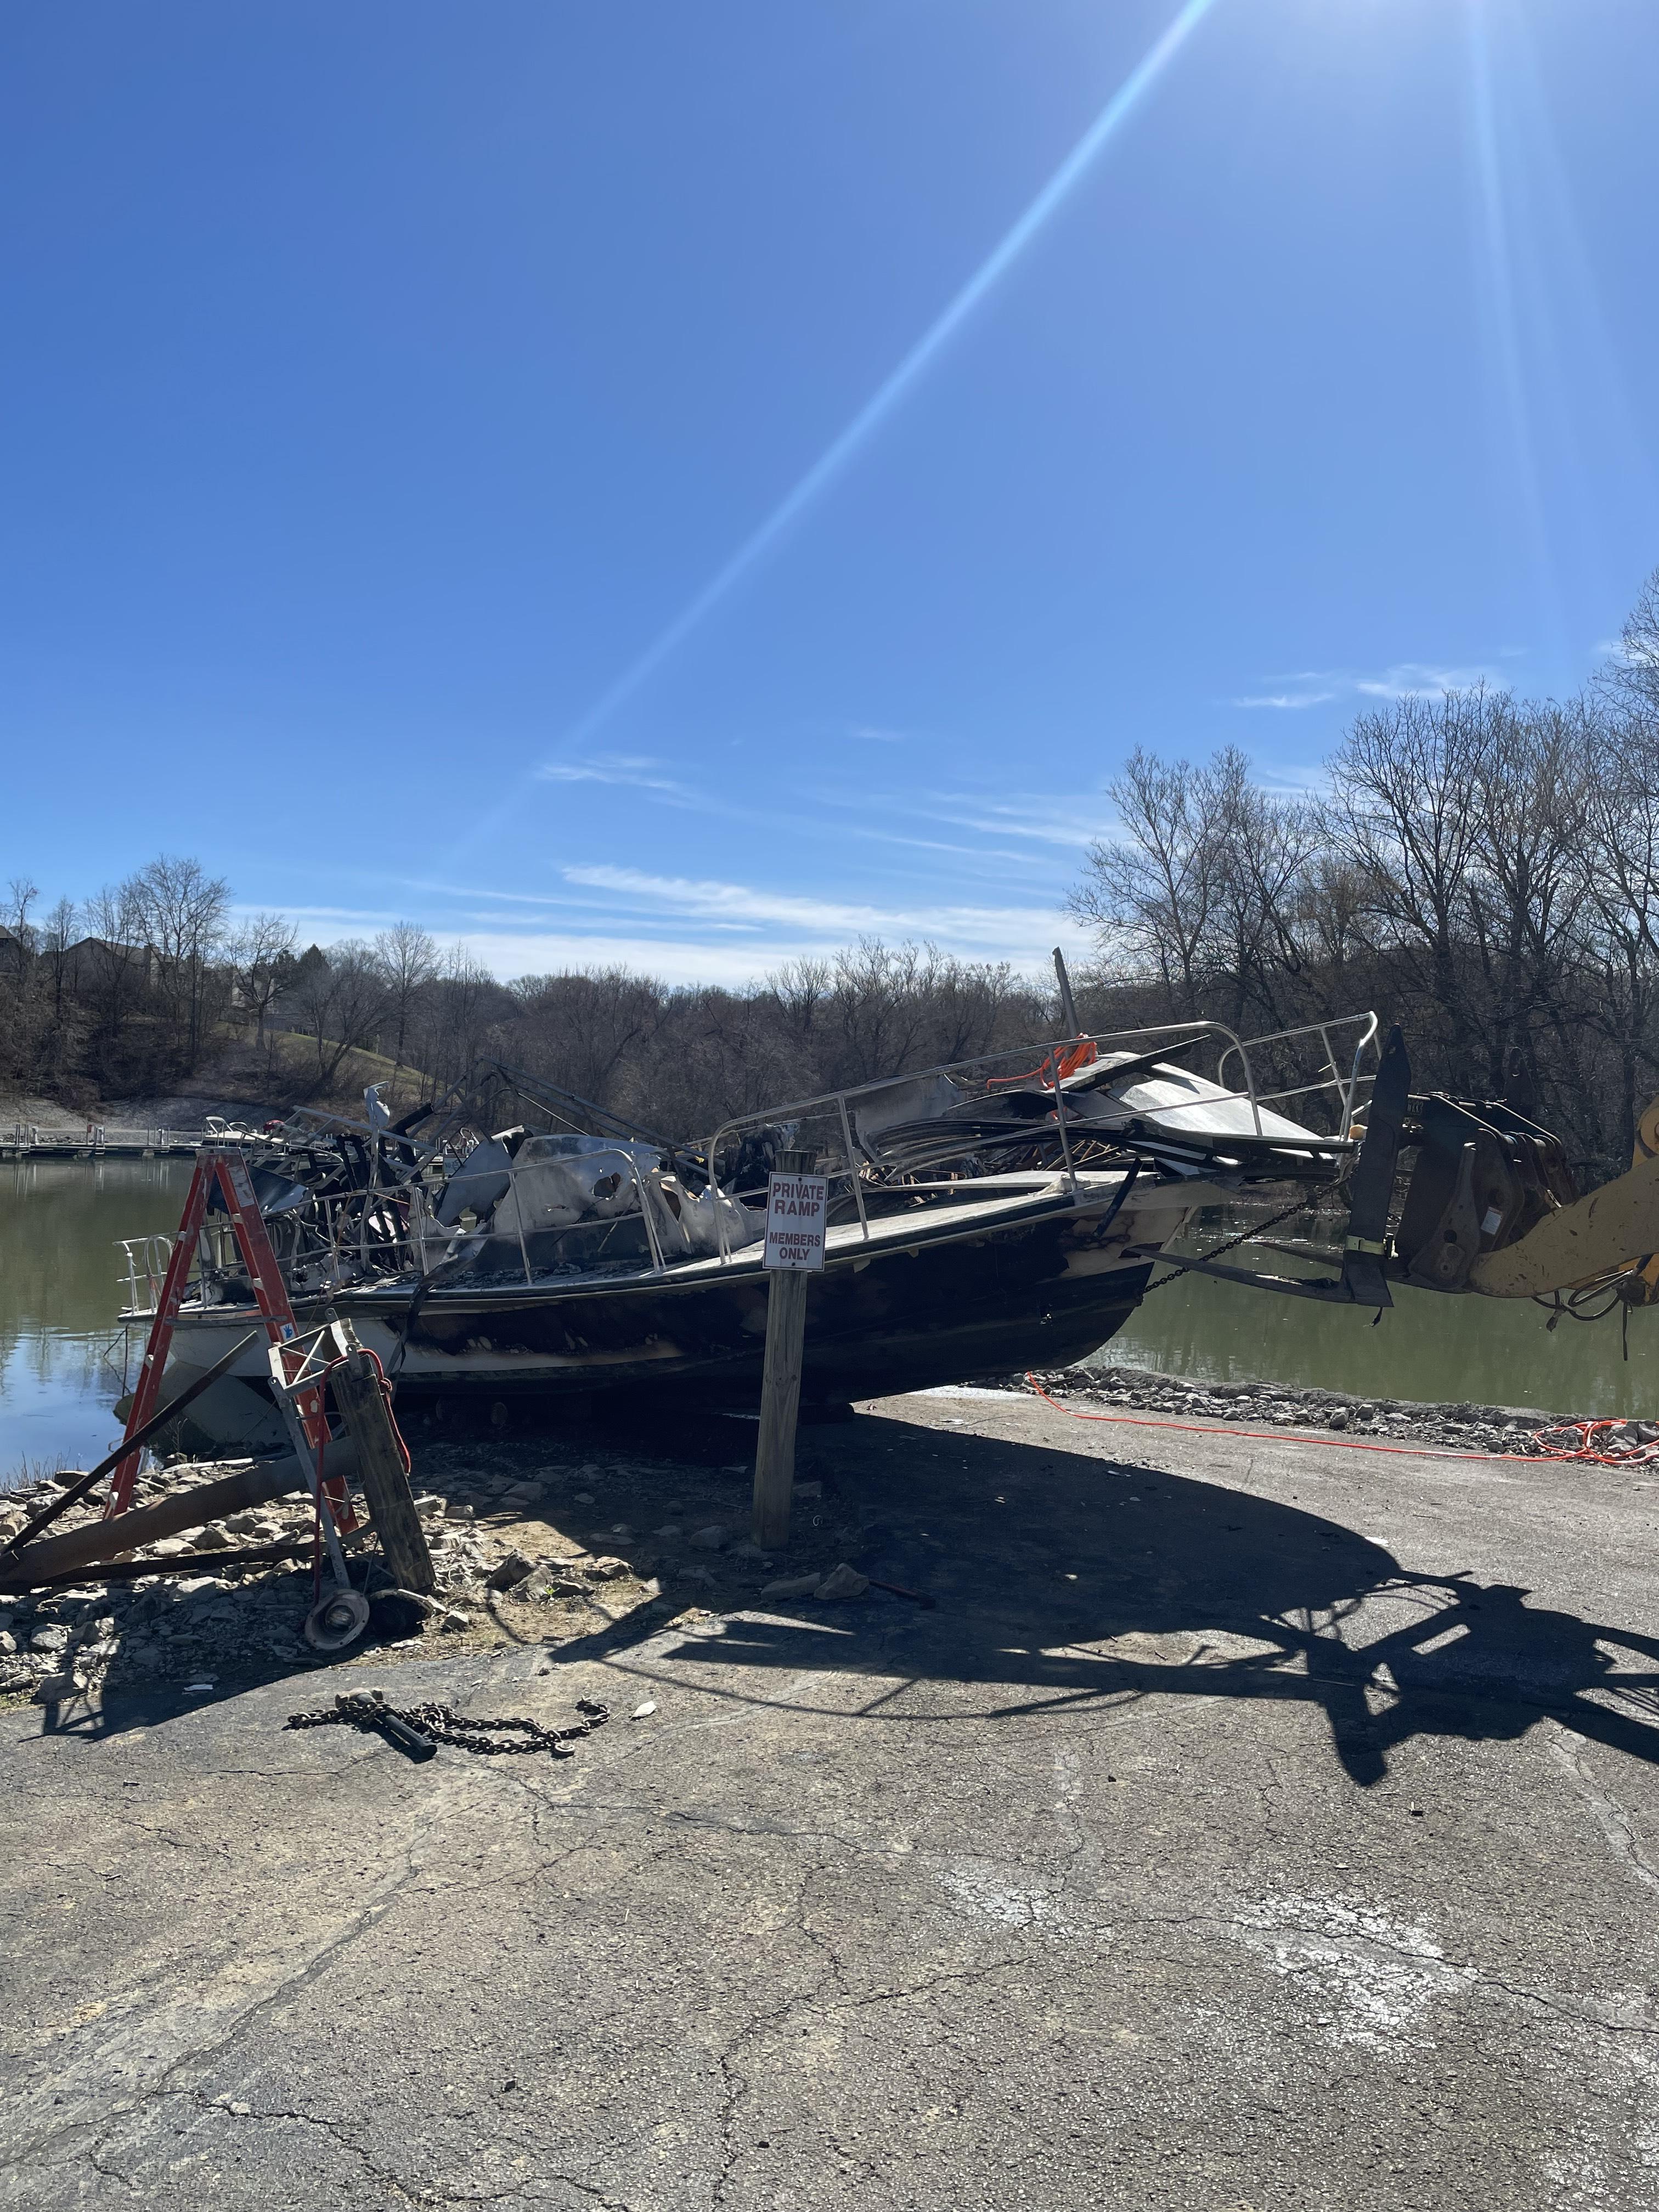 Vessel resting on the bank of the boat ramp in wait for investigation and demolition.